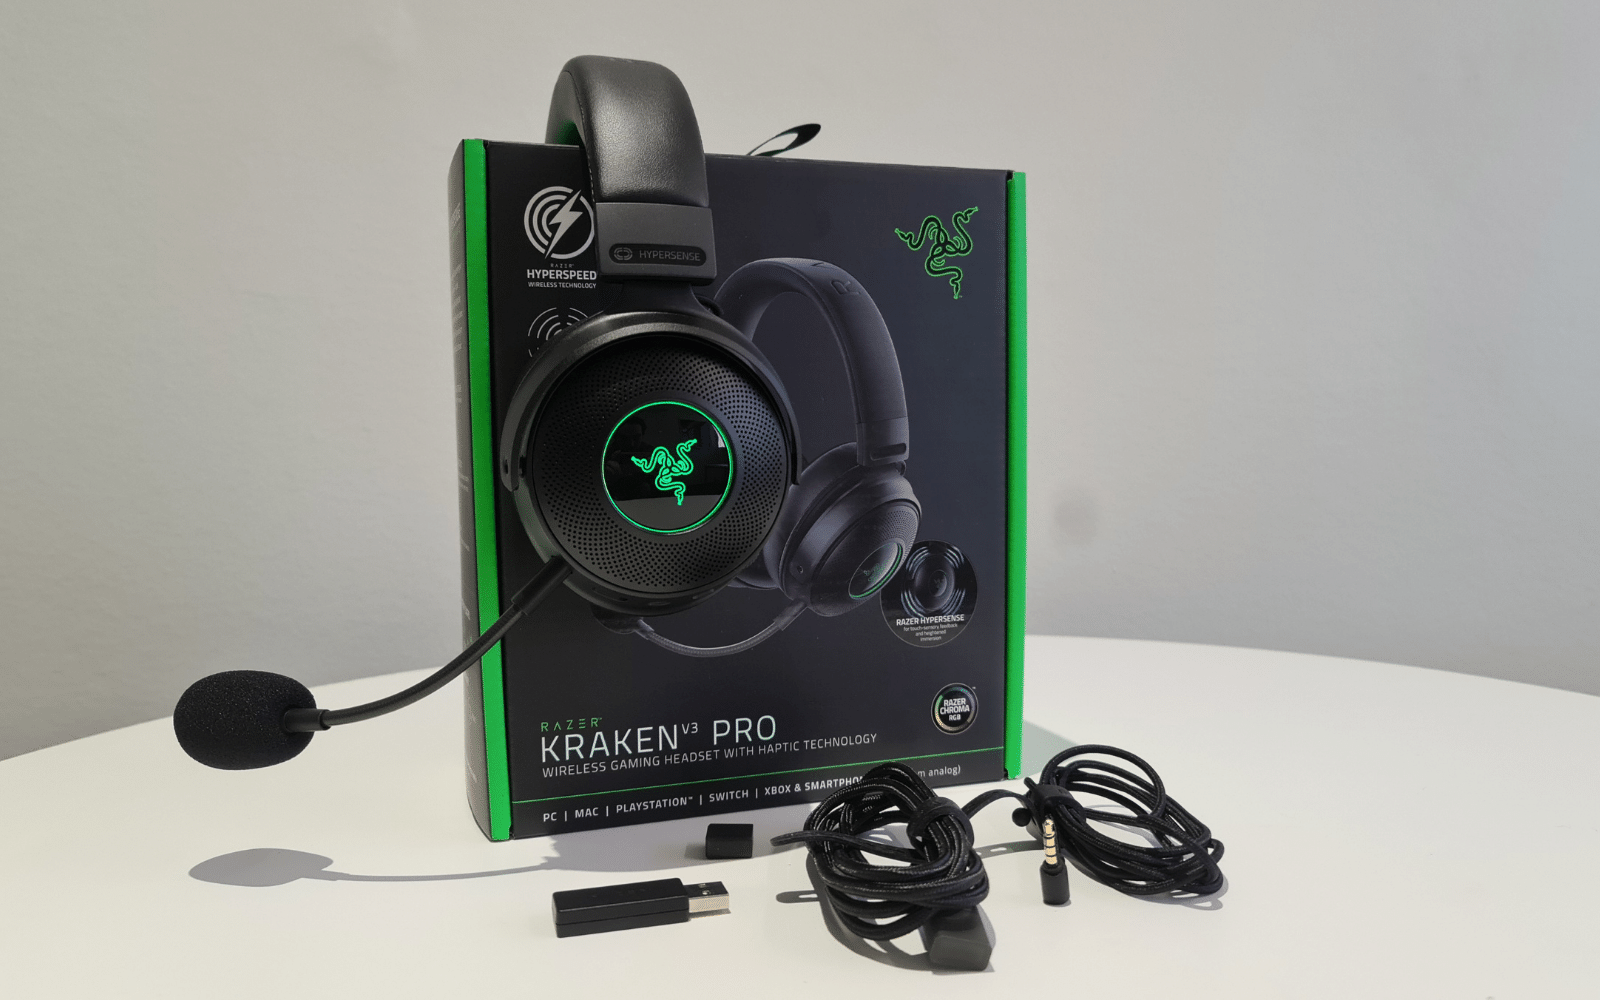 Razer Kraken V3 Pro Review - Decent Gaming Cans, Even Without The